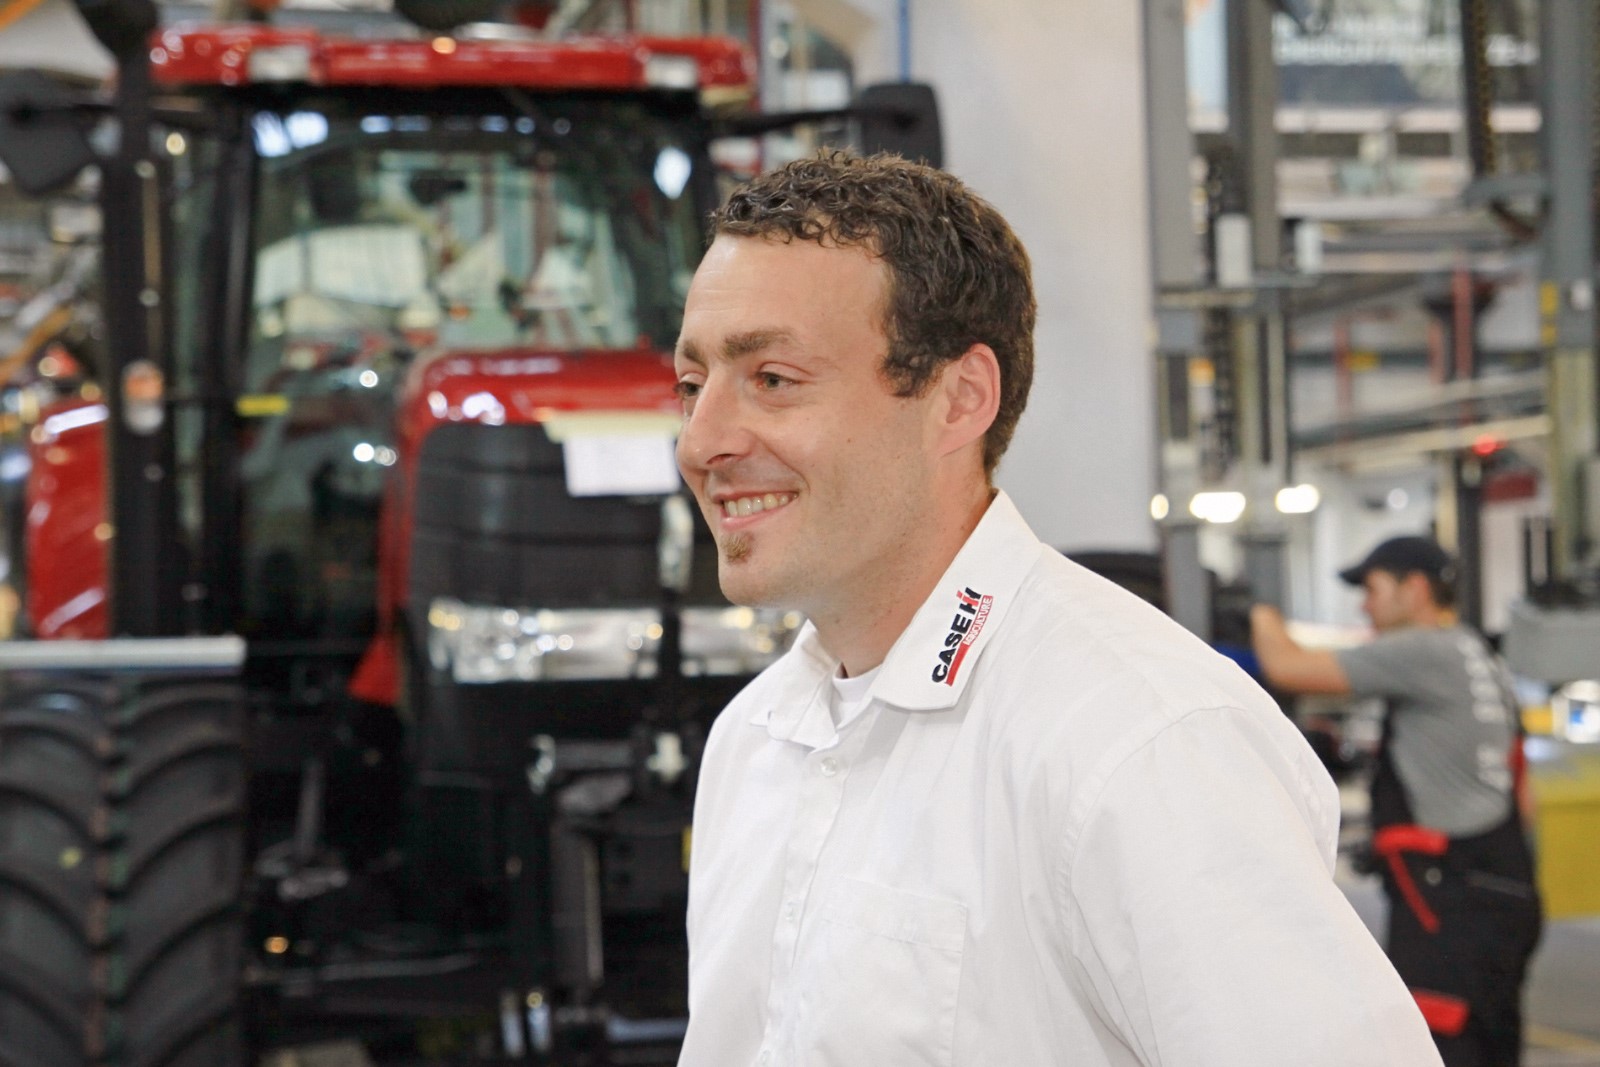 Andreas Kampenhuber takes on Plant Manager responsibilities at St. Valentin